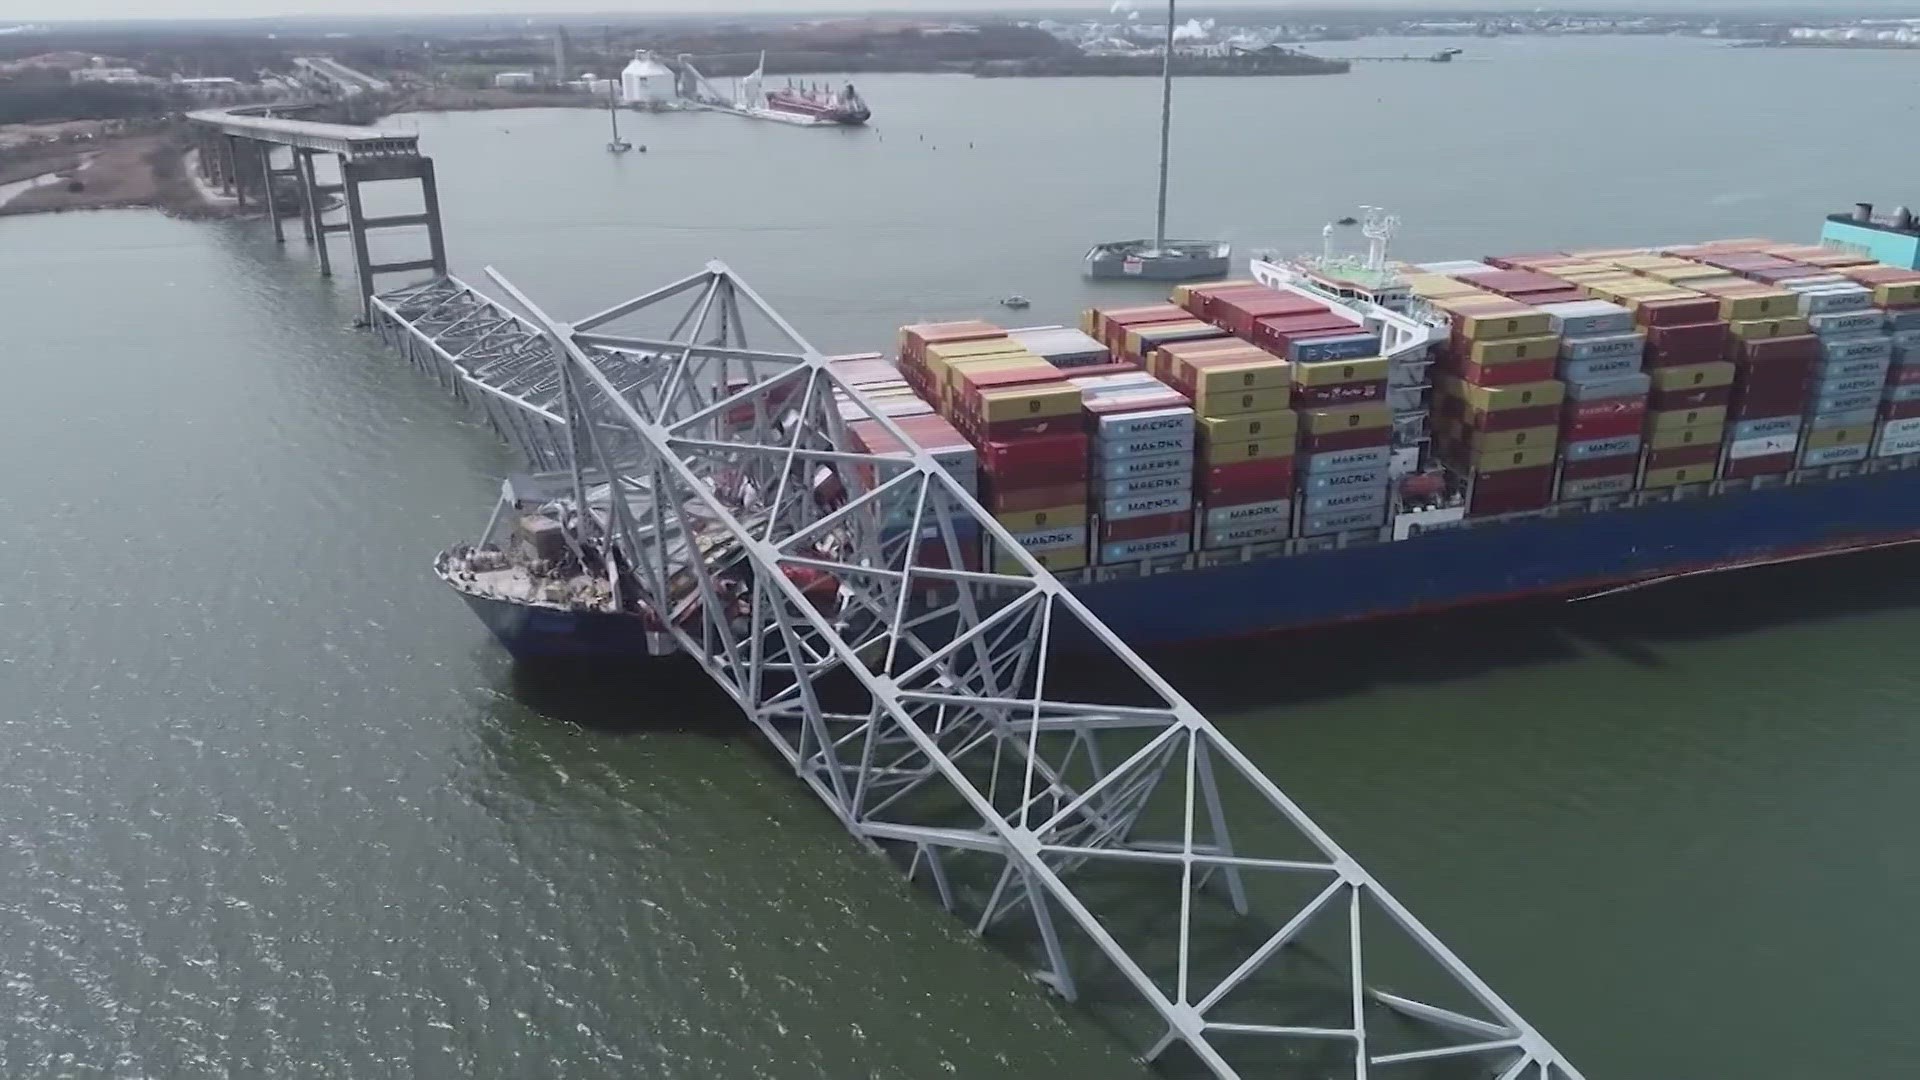 Here's the latest information on the investigation into the freight ship crash that brought down the Frances Scott Key Bridge in Baltimore, Maryland.